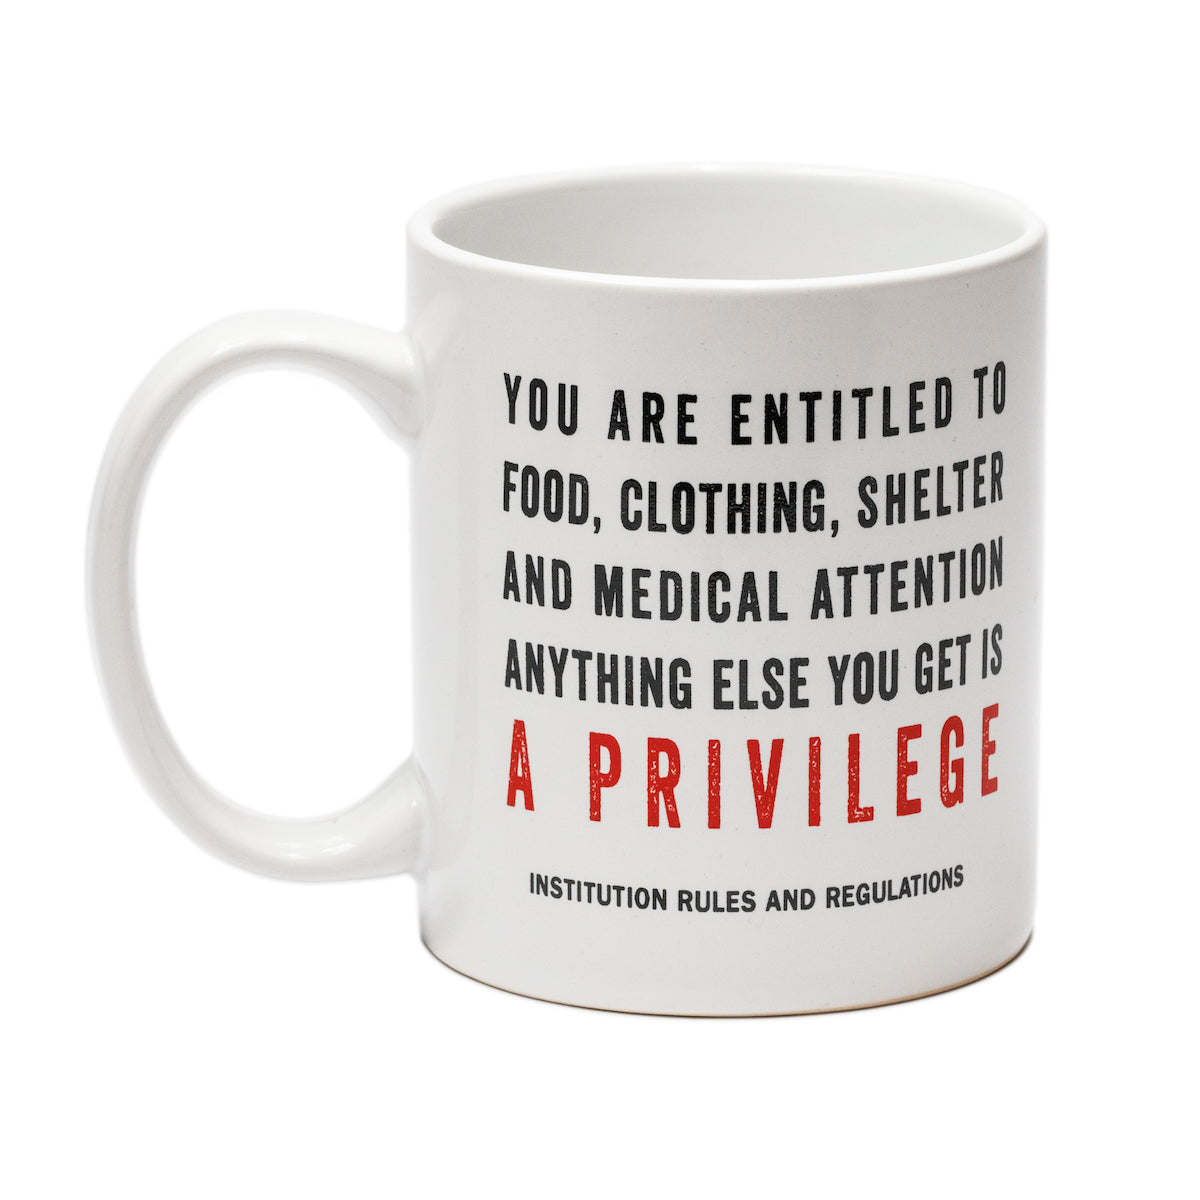 11 oz. white mug with black and red design reading “You are entitled to food, clothing, shelter, and medical attention. Anything else you get is a privilege”.